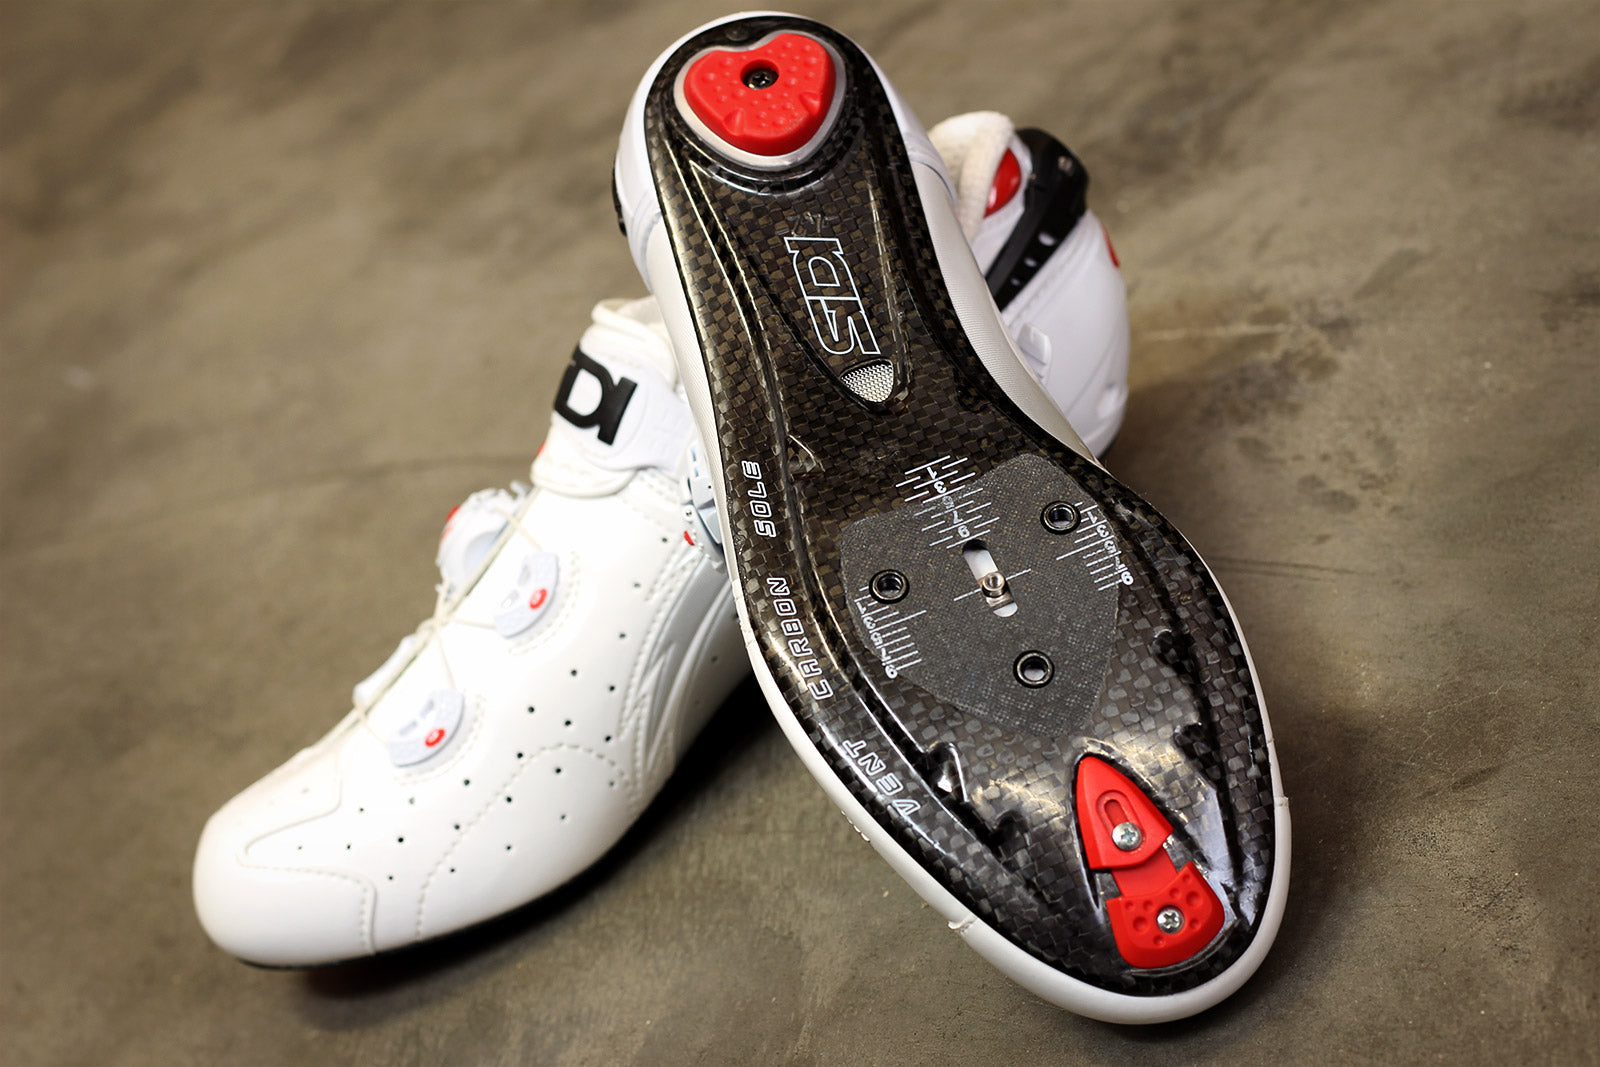 sidi wire carbon weight